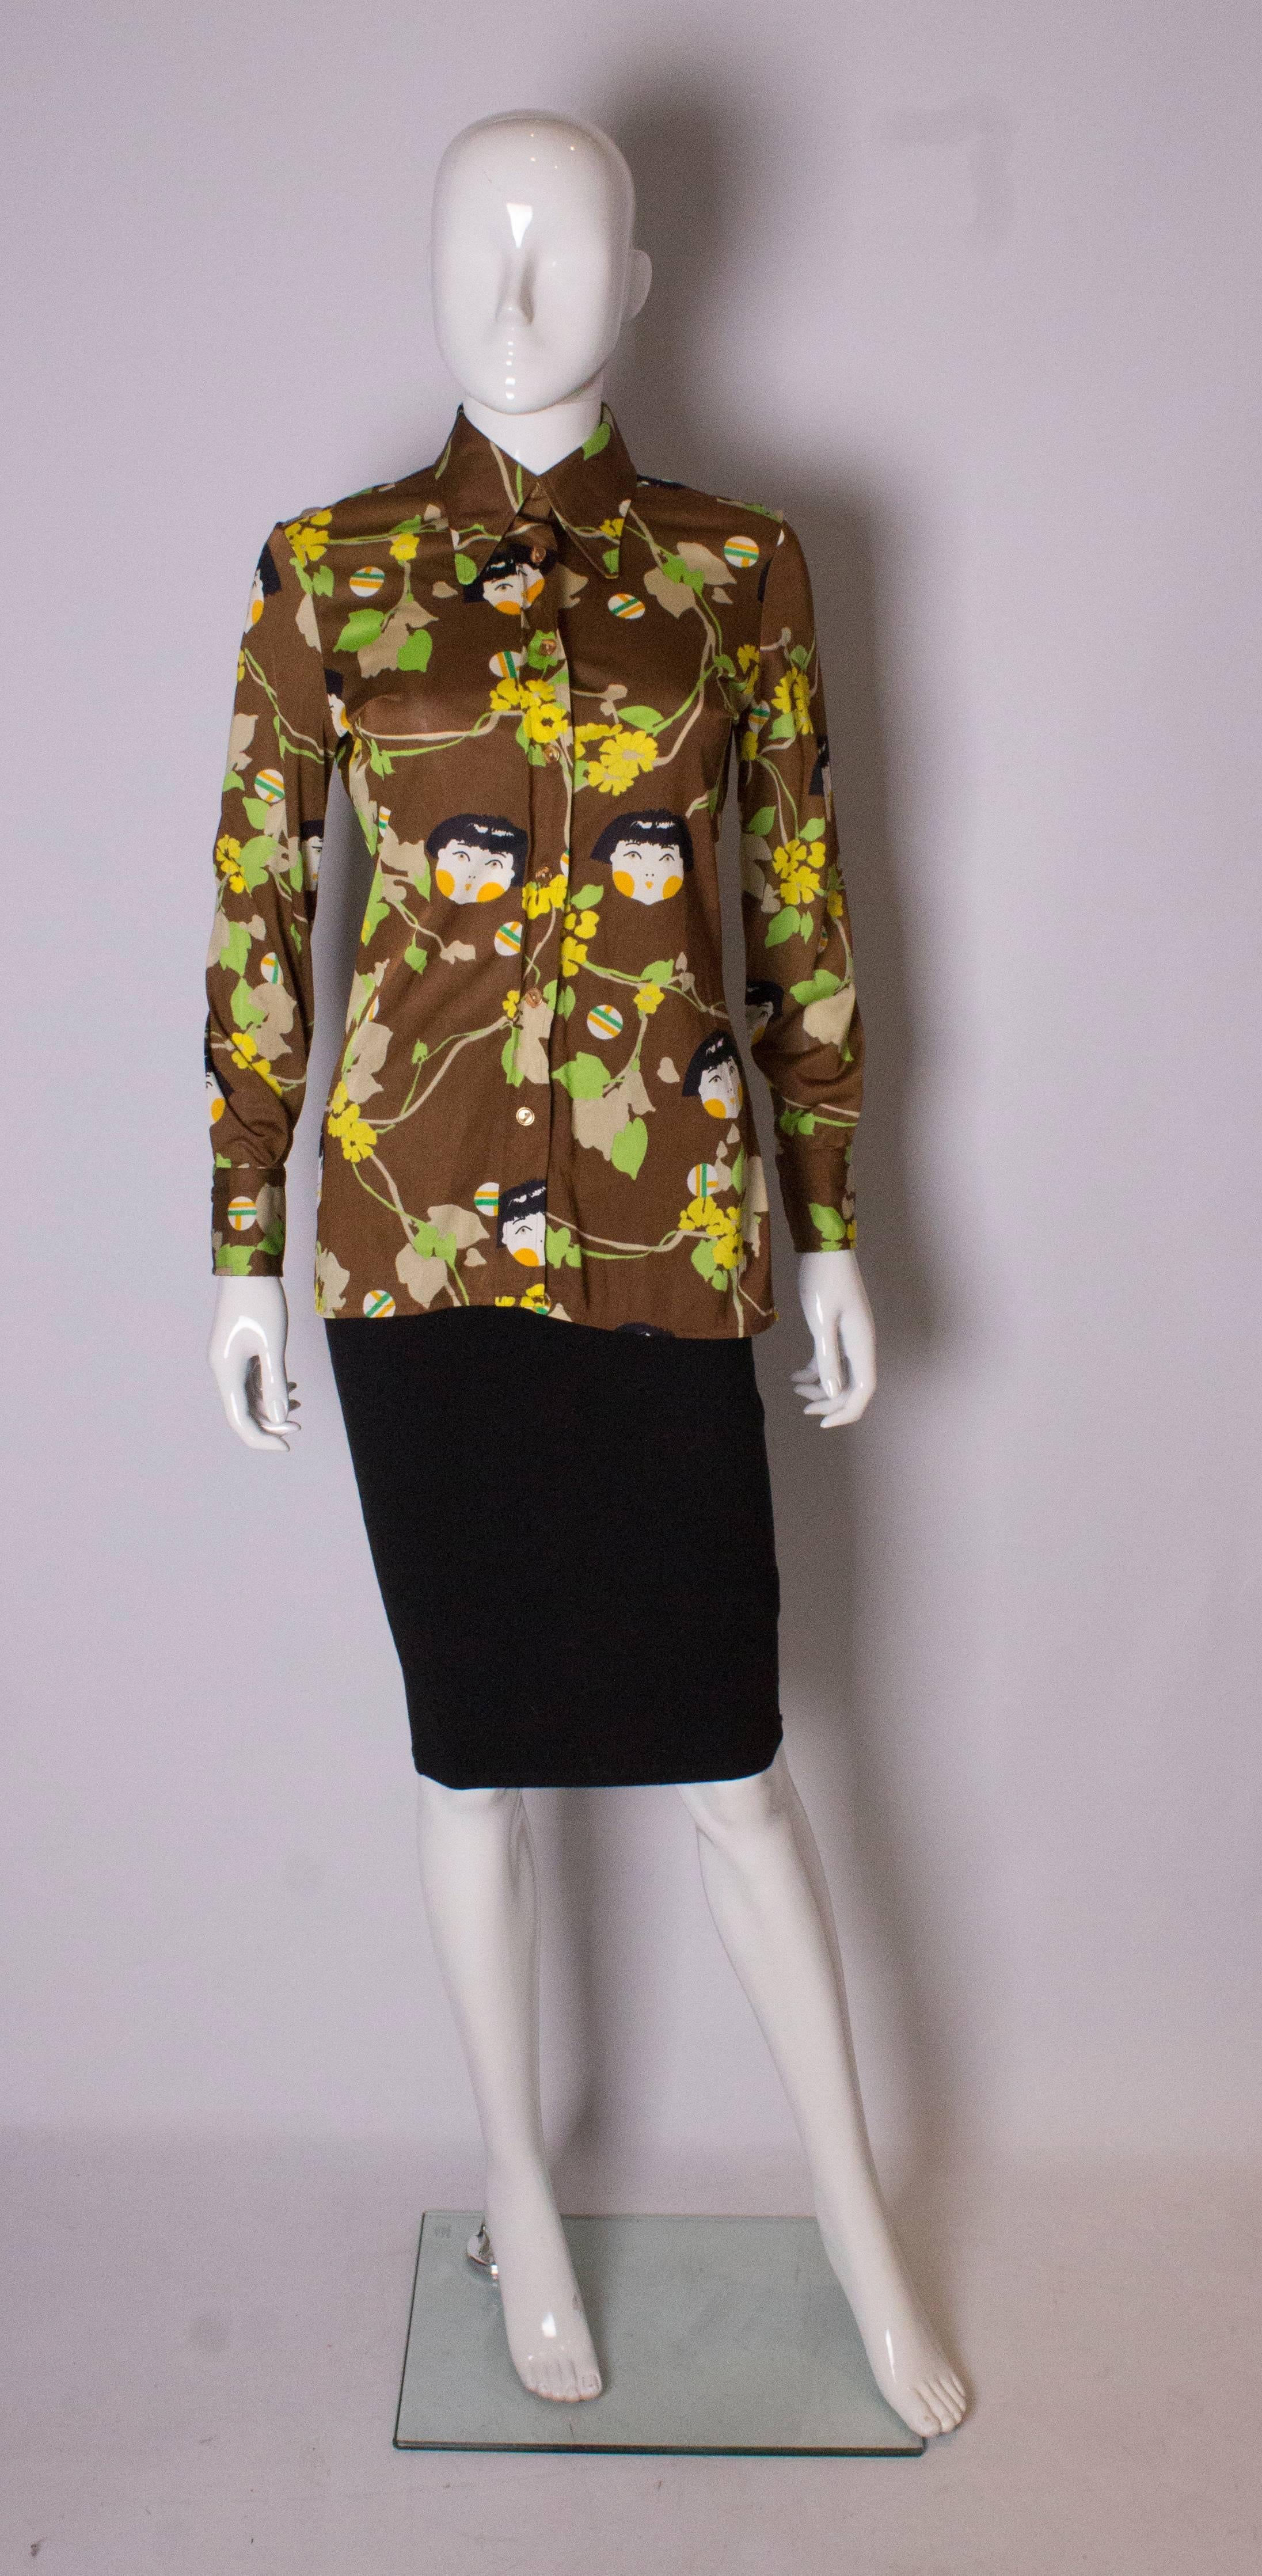 A great shirt by Elli, Europ Craft of Italy. The shirt is made of a textured nylon with double button cuffs. It has a brown background with a green and yellow, face and flora print.